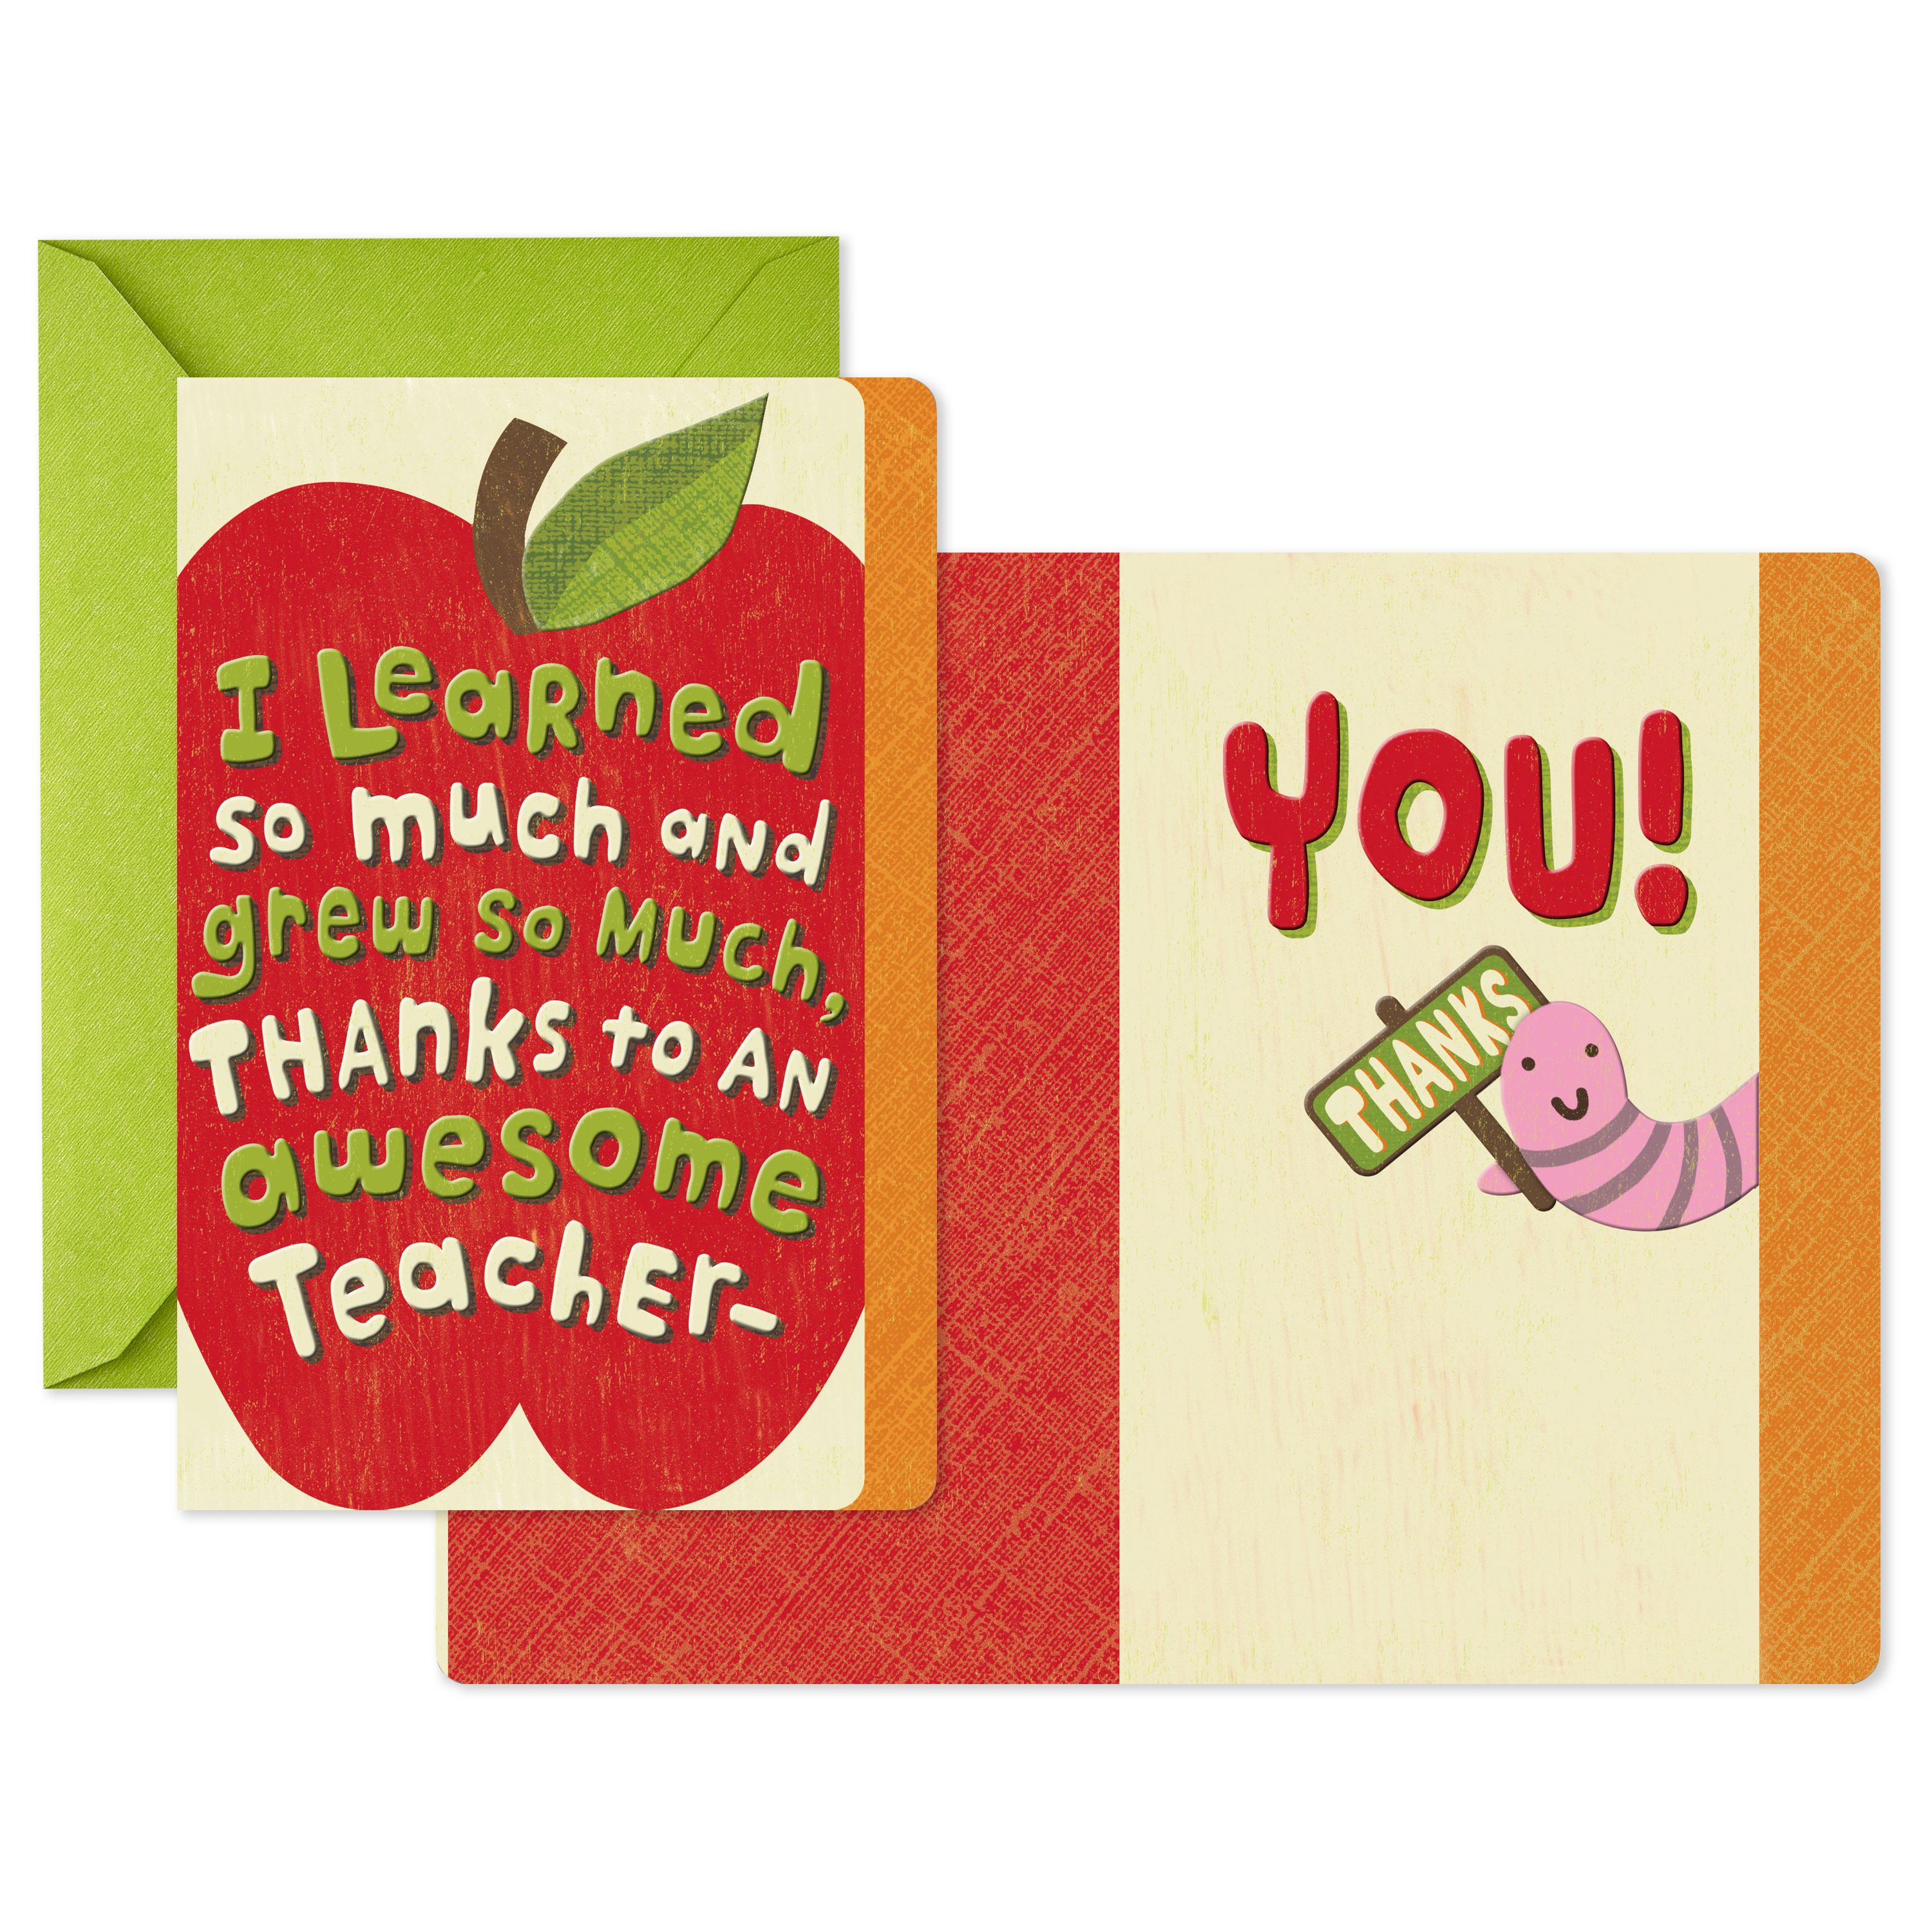 Hallmark Teacher Appreciation Cards Assortment for Preschool, Kindergarten, Elementary School, Graduation or Back to School (10 Cards and Gift Card Holders with Envelopes) - image 3 of 11